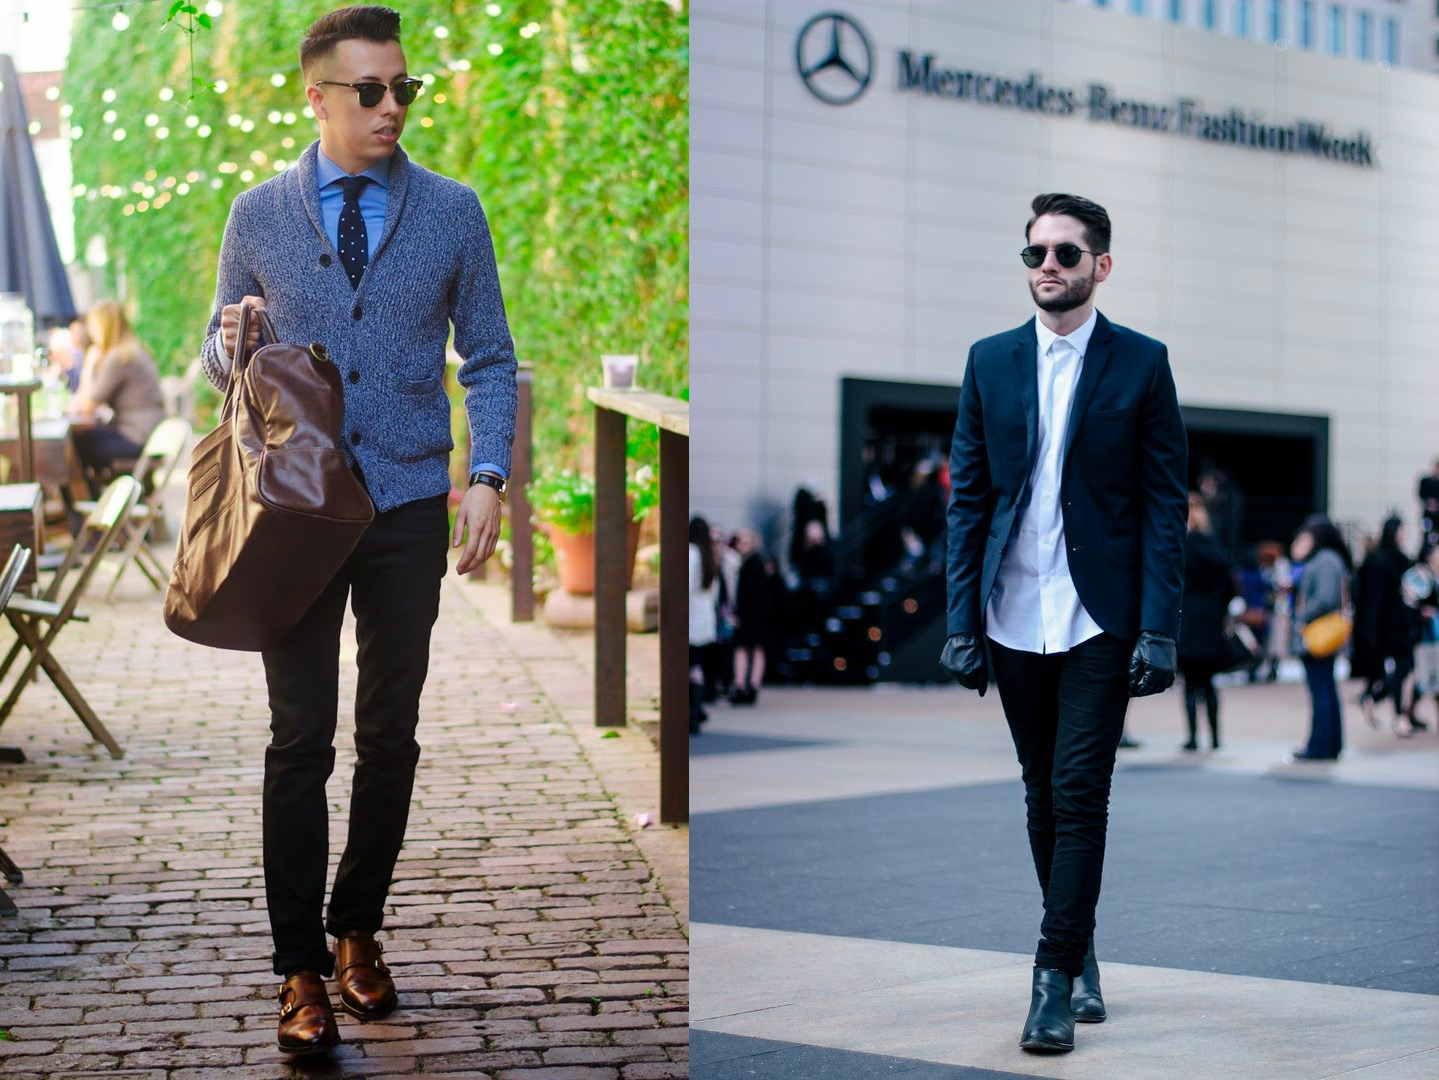 smart casual with black jeans